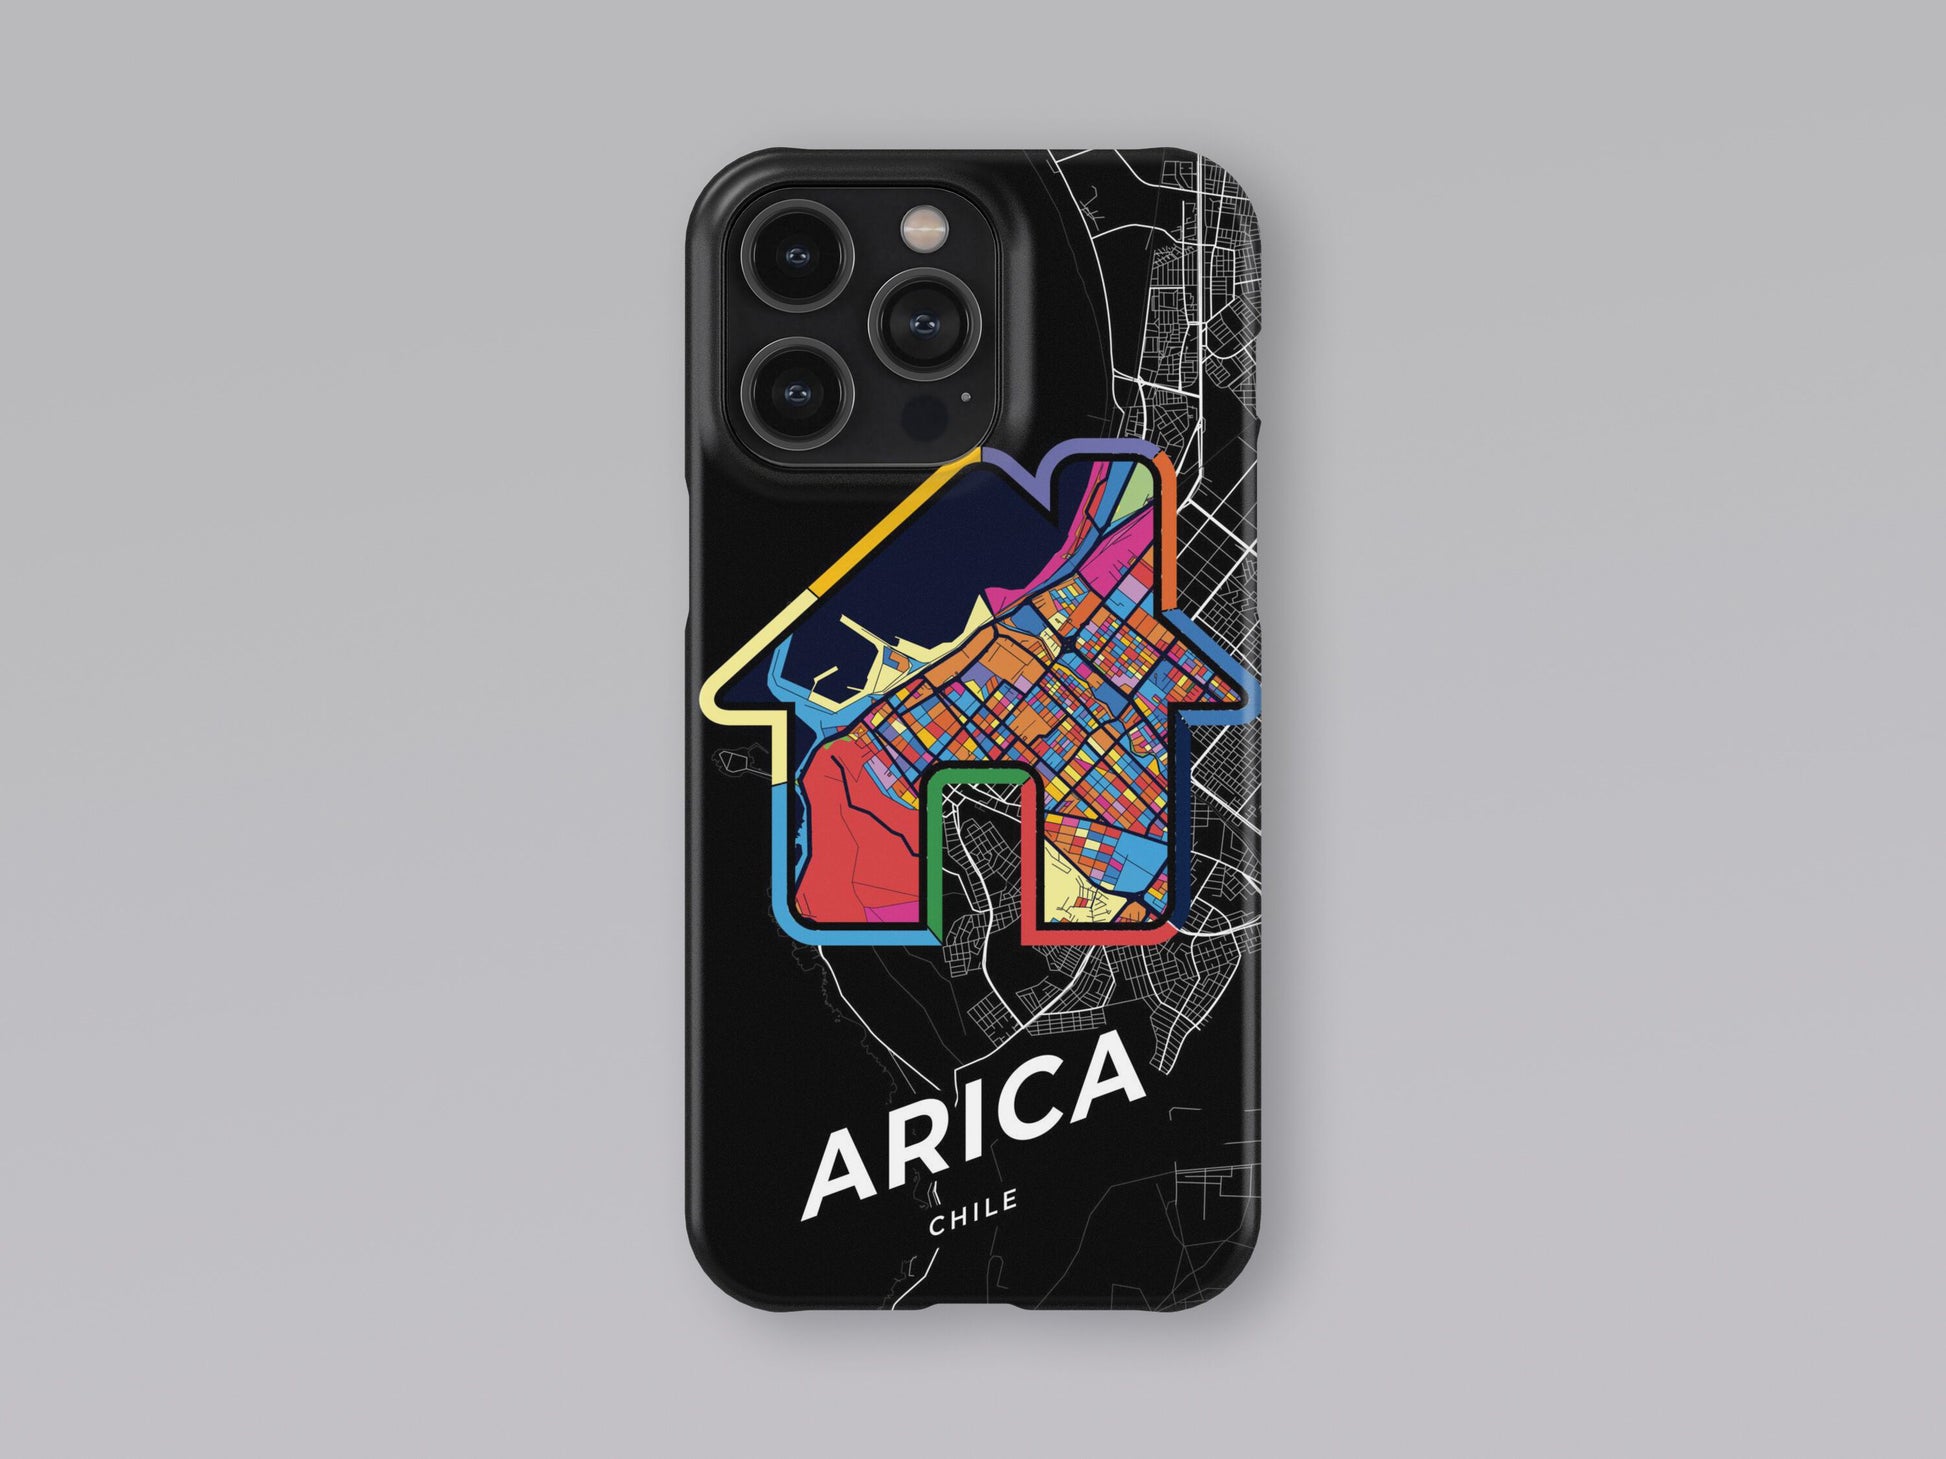 Arica Chile slim phone case with colorful icon. Birthday, wedding or housewarming gift. Couple match cases. 3